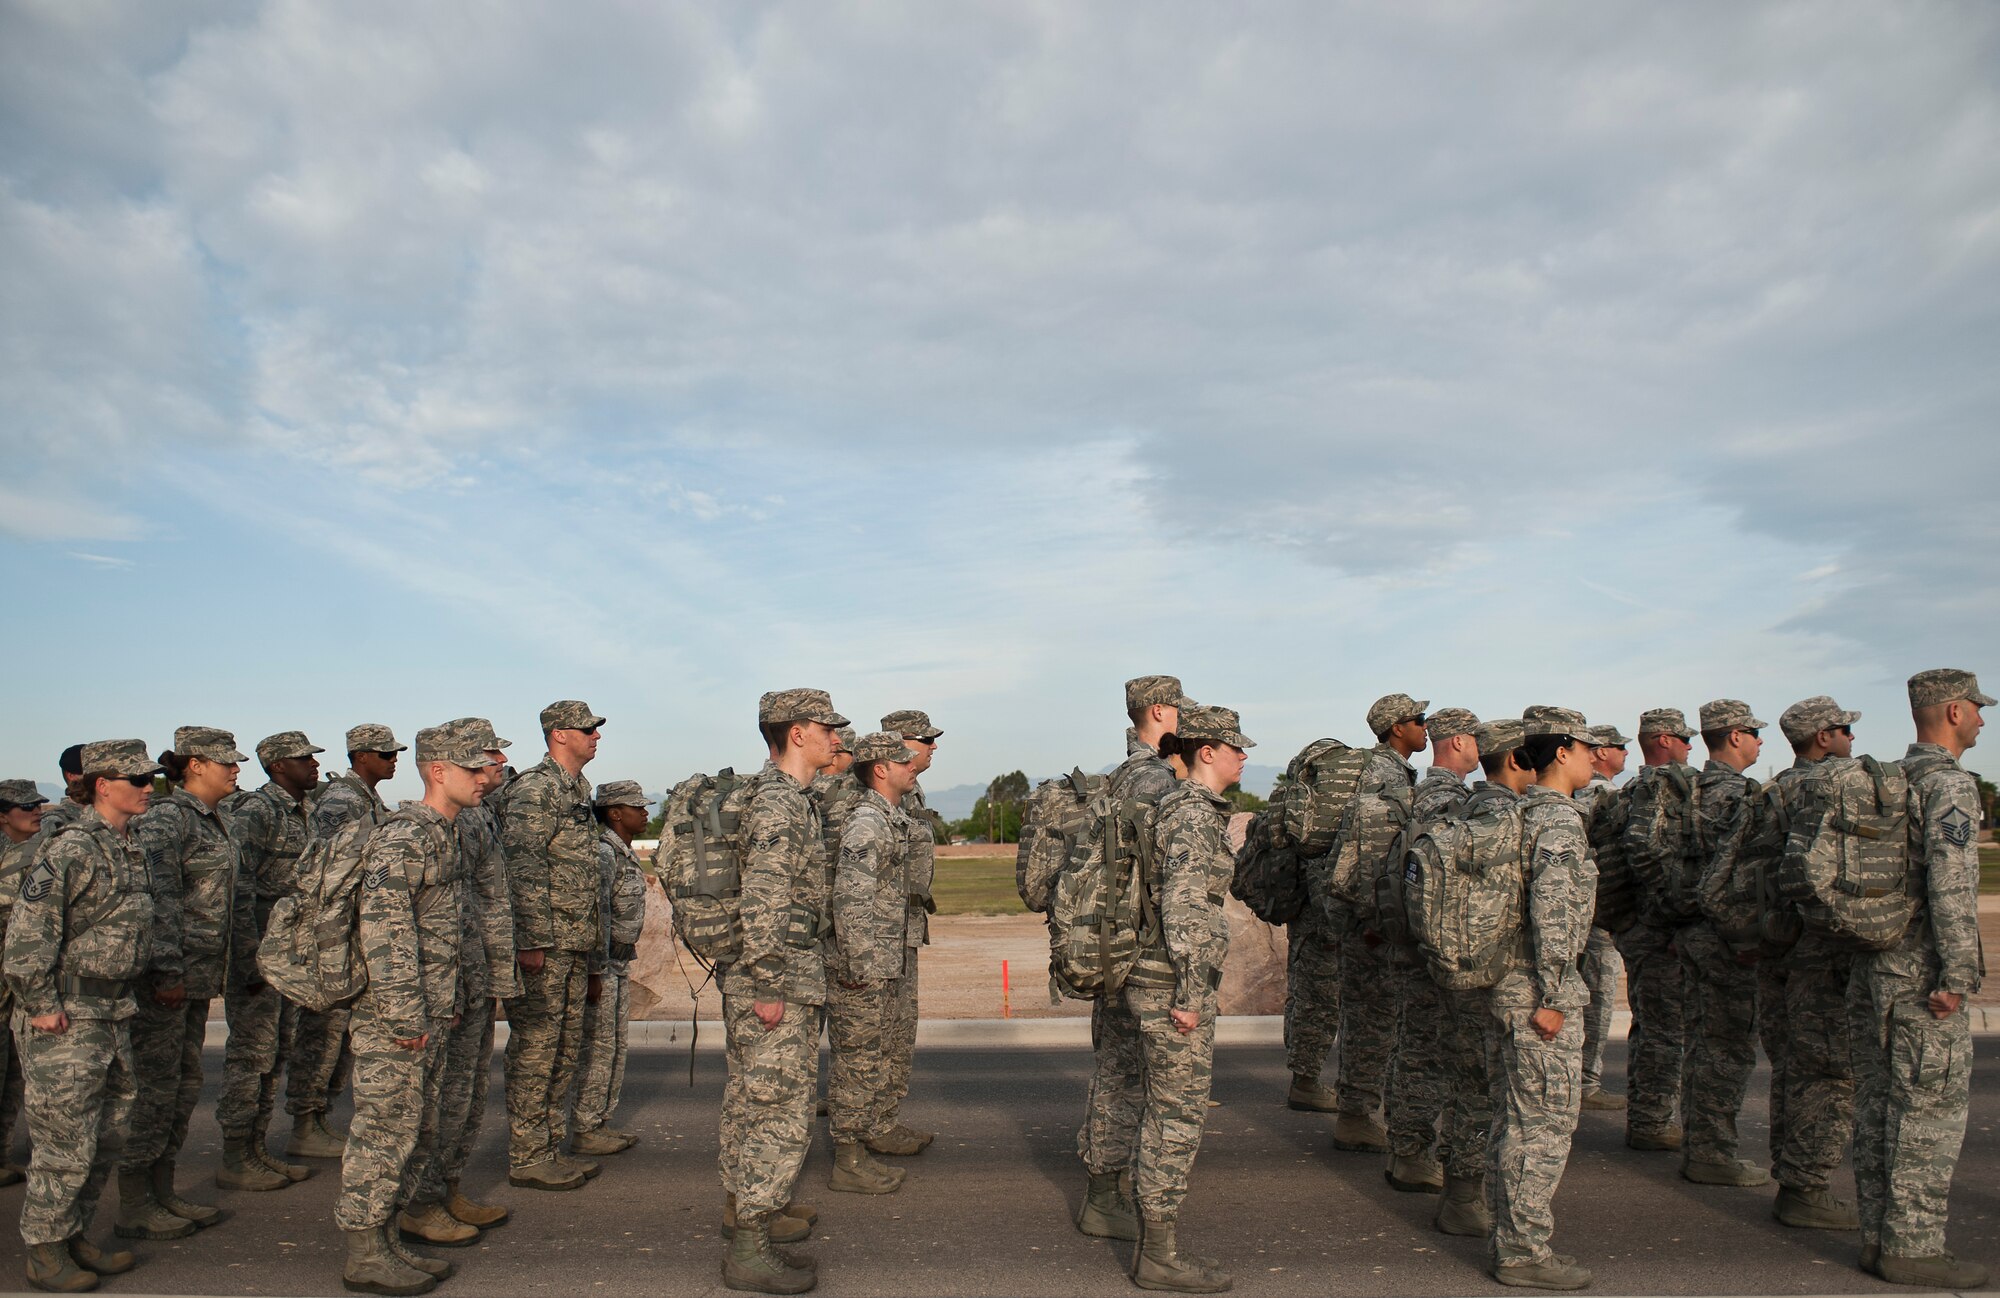 Airmen assigned to the 99th Security Forces Squadron stand in formation during a 10K memorial ruck march for National Police Week at Nellis Air Force Base, Nev., May 13, 2015. Throughout the march, the formation stopped to honor wingmen who were killed in the line of duty. (U.S. Air Force photo by Staff Sgt. Siuta B. Ika)